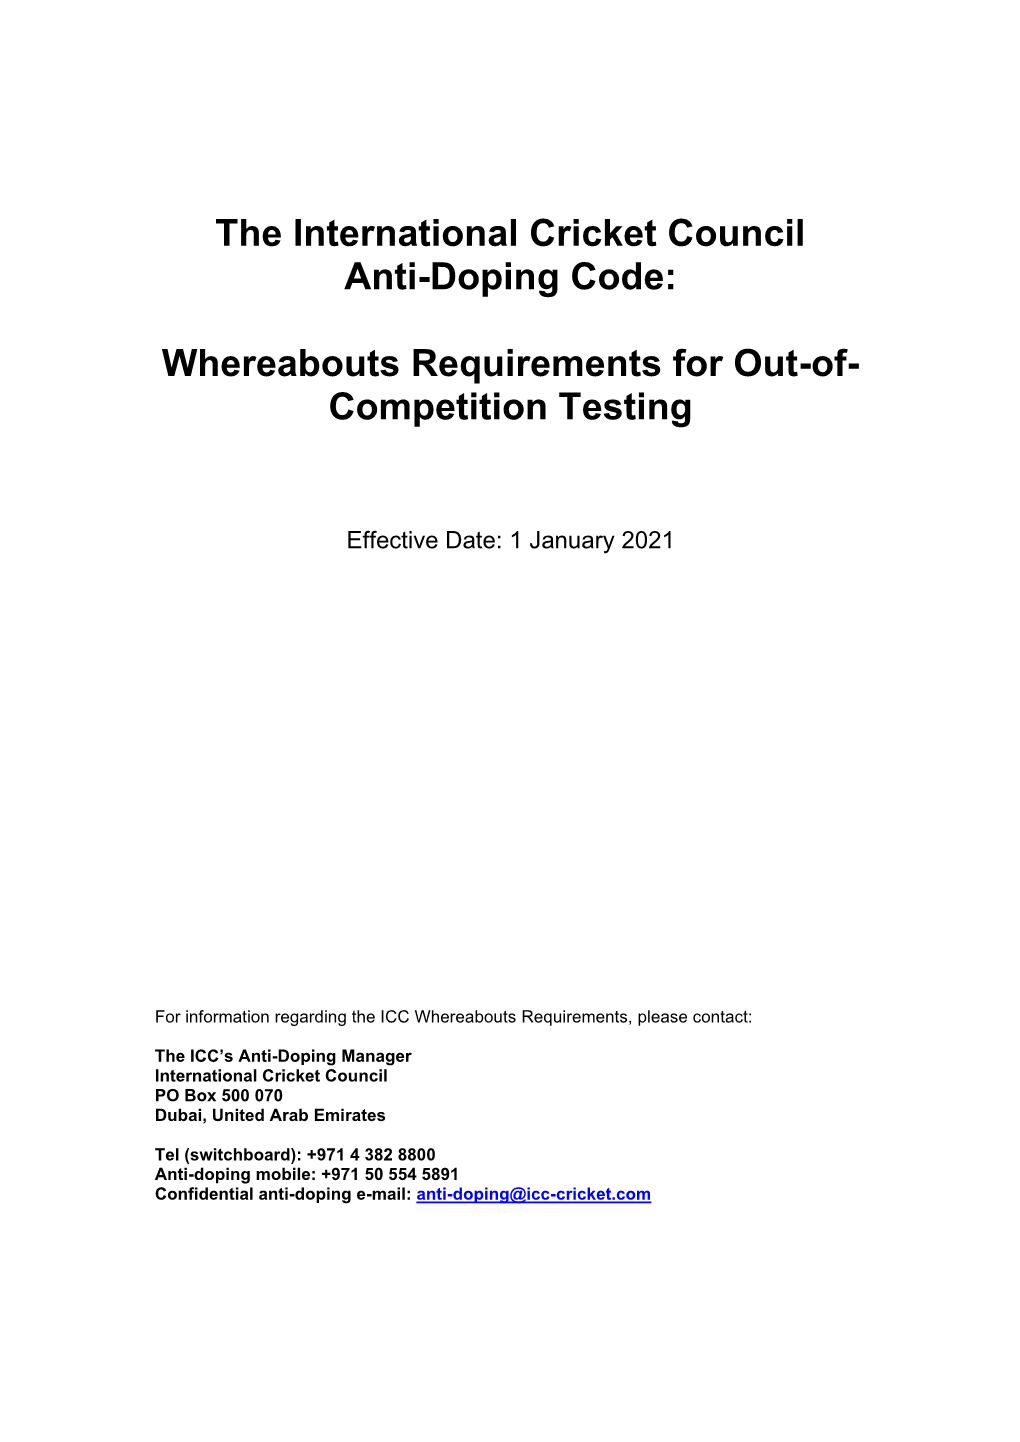 ICC Whereabouts Rules